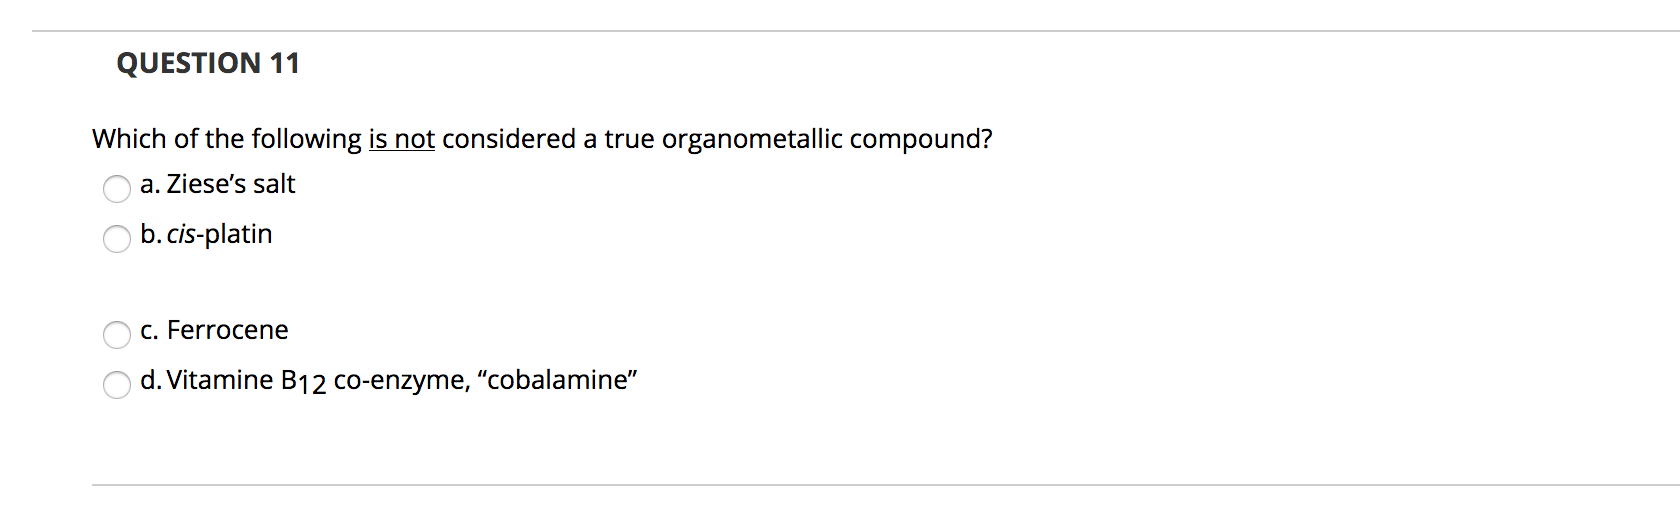 Which of the following is not considered a true organometallic compound?
a. Ziese's salt
b. cis-platin
c. Ferrocene
d. Vitamine B12 co-enzyme, "cobalamine"
